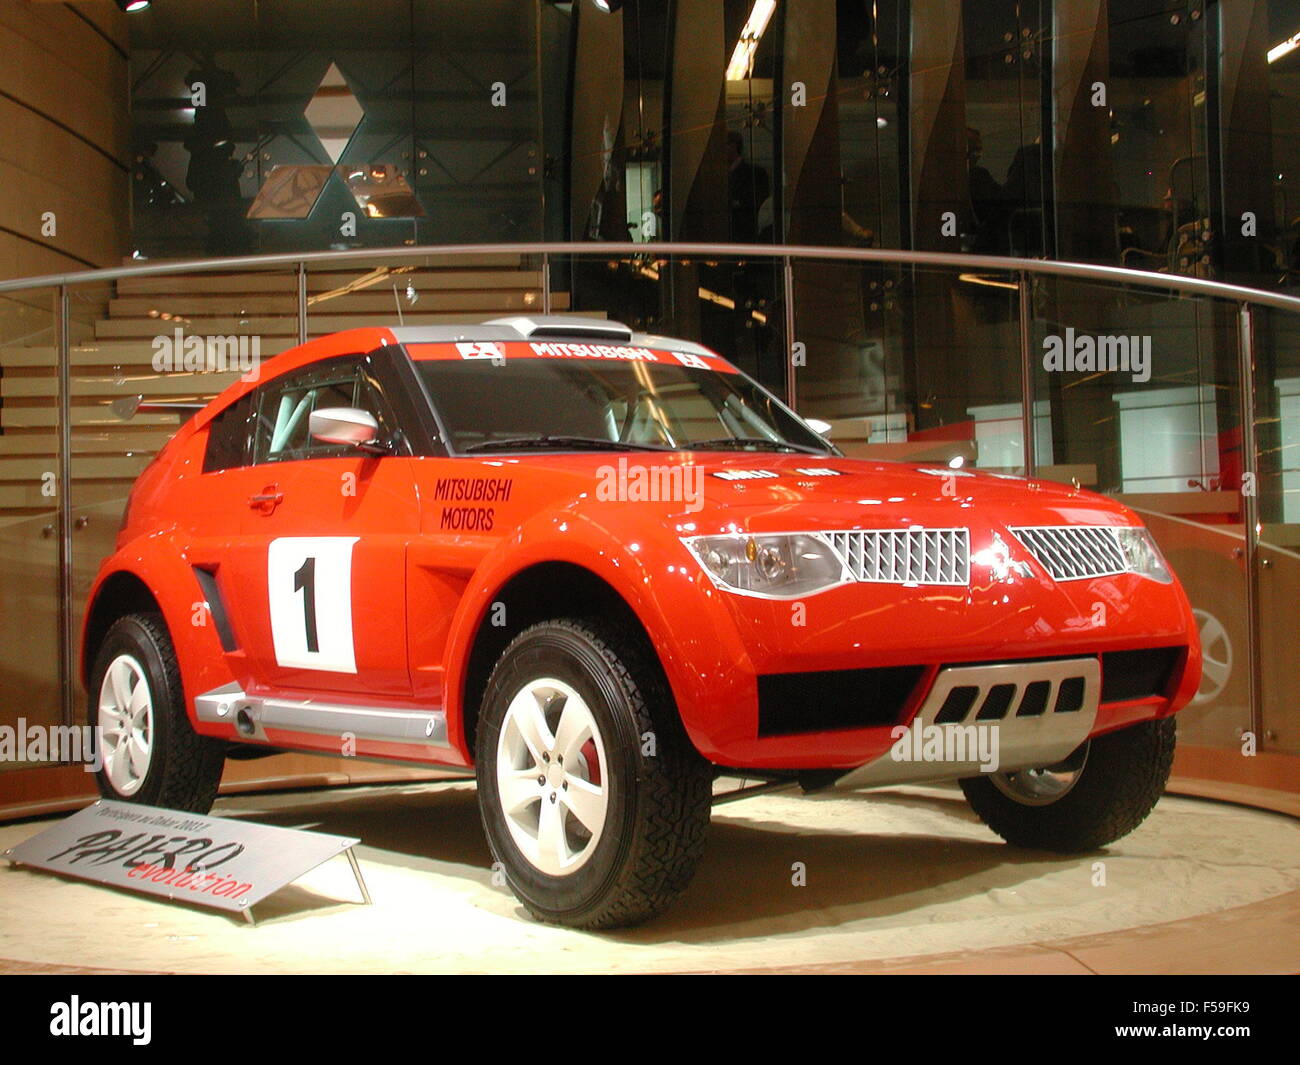 Mitsubishi Pajero Evo Evolution concept car shown at geneva motorshow 2002 to be used for dakar rally showing front and side view Stock Photo